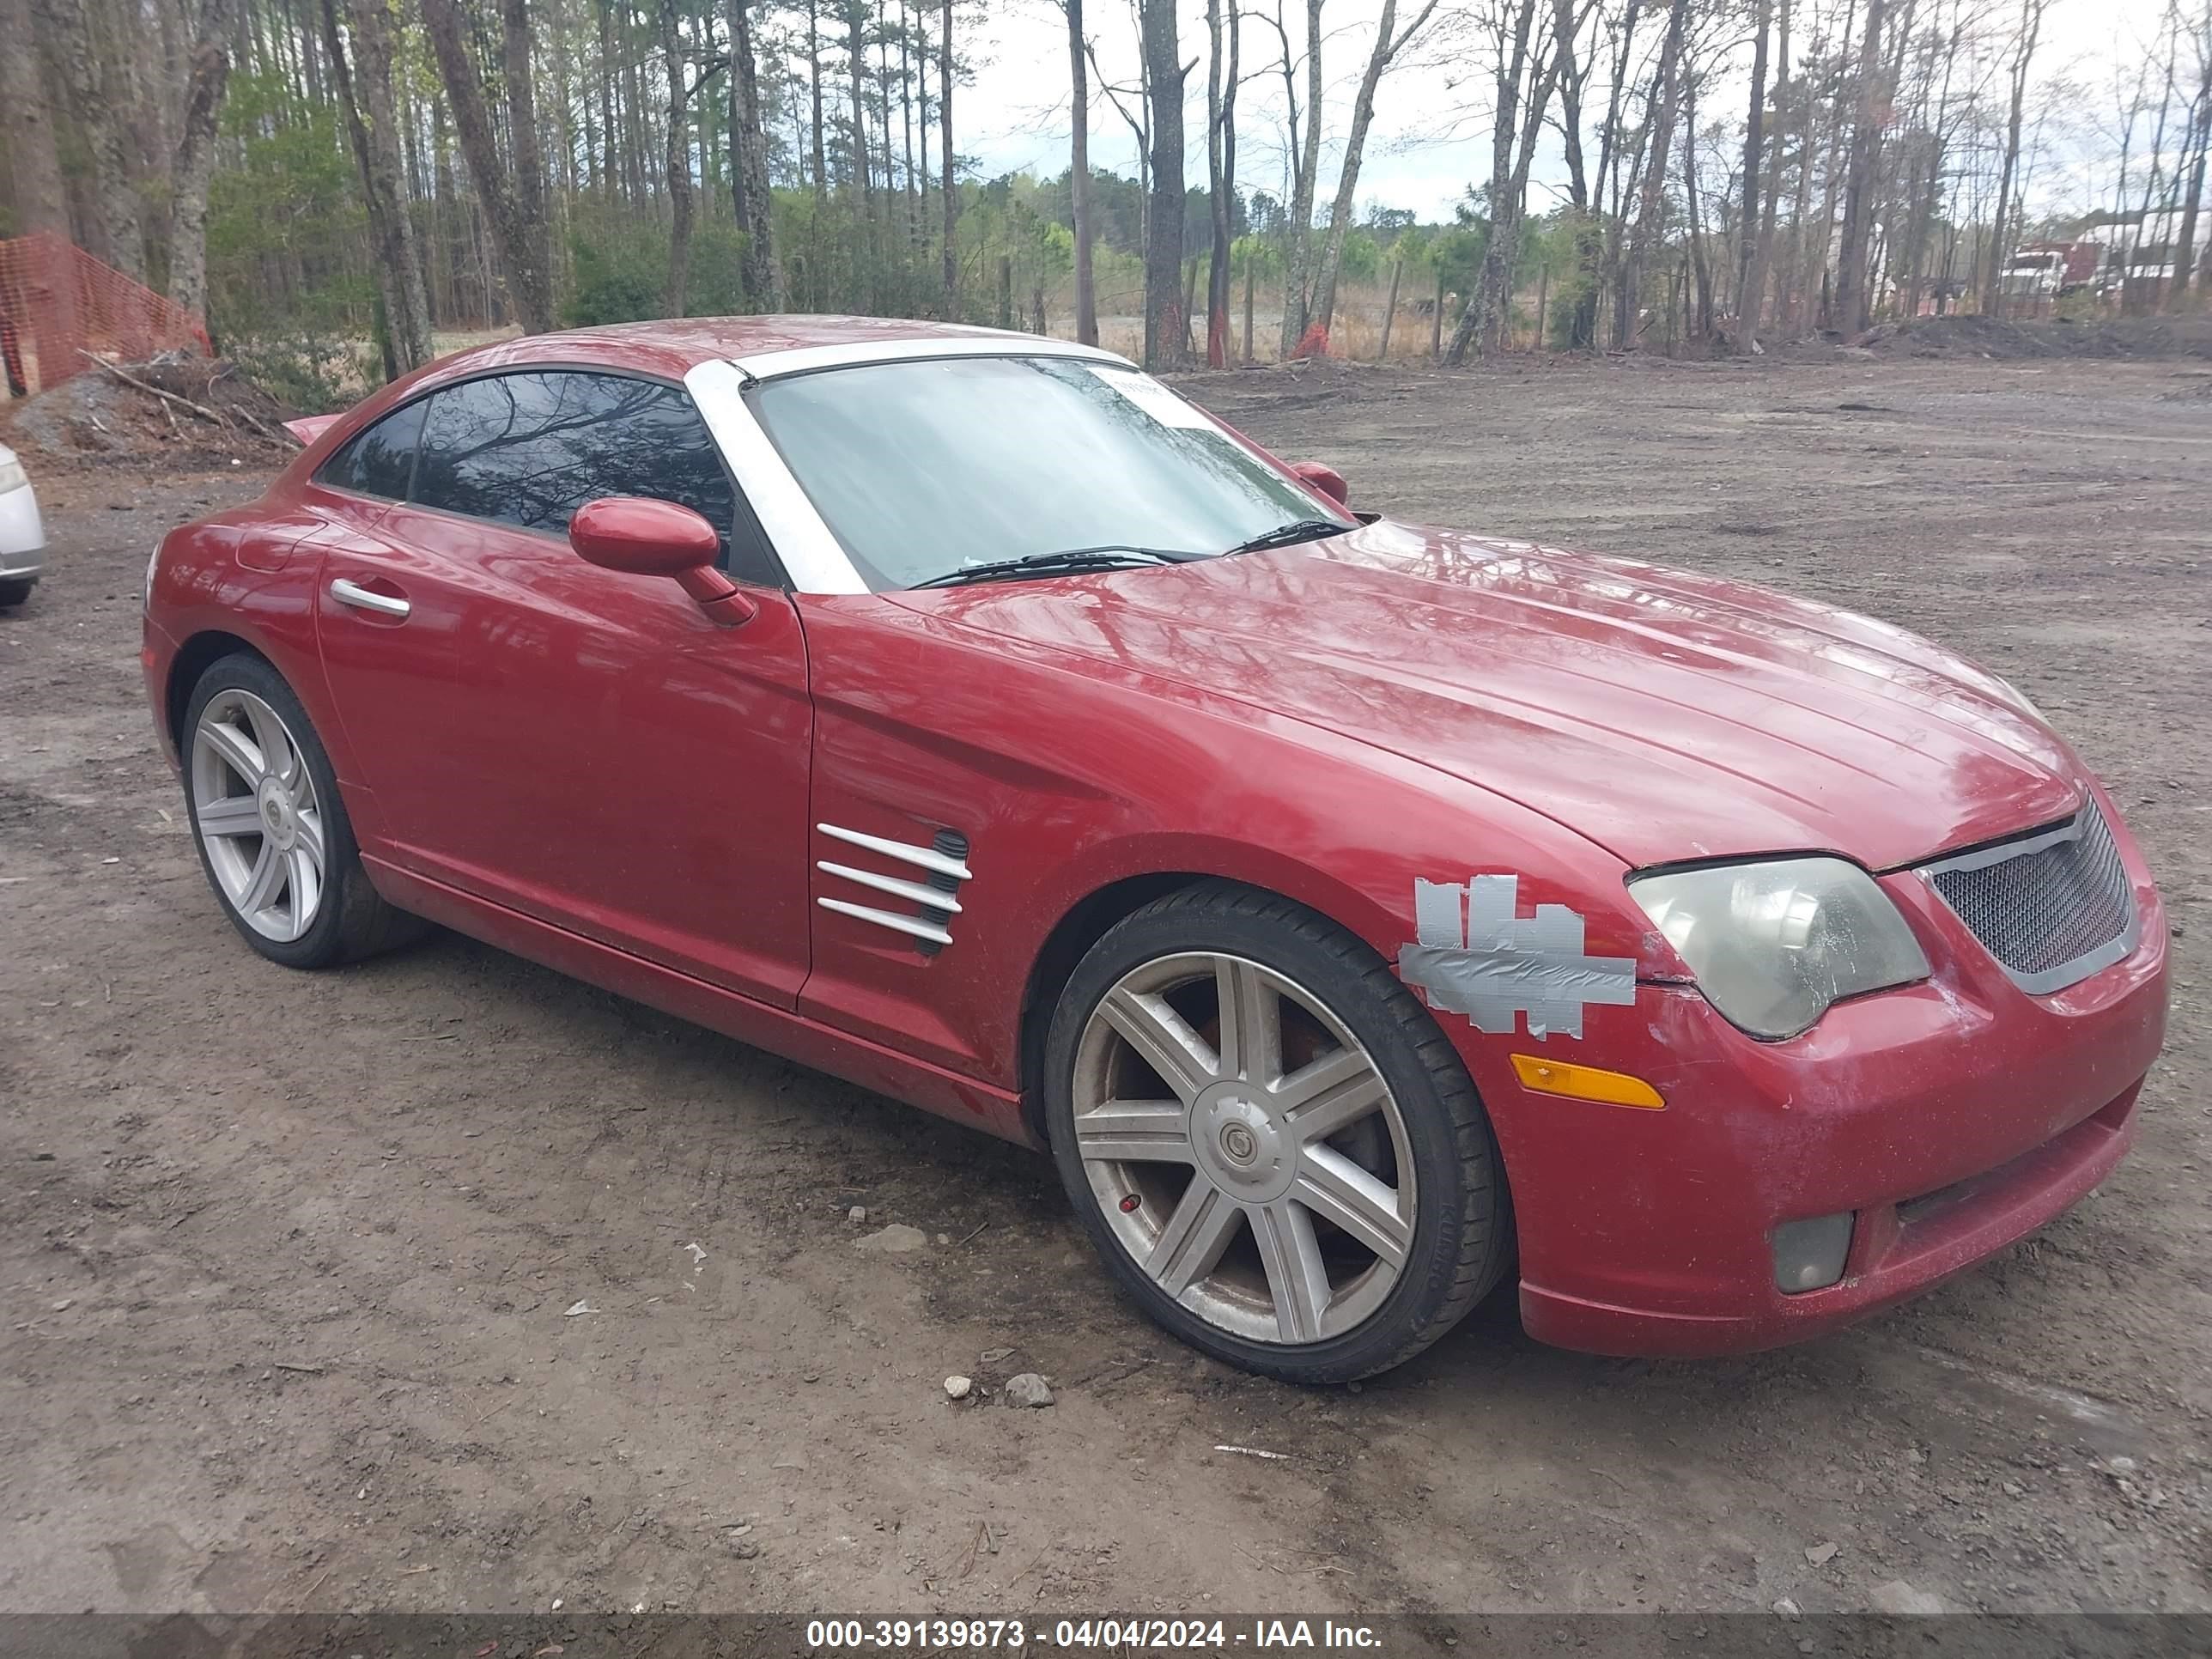 vin: 1C3AN69L64X009129 1C3AN69L64X009129 2004 chrysler crossfire 3200 for Sale in 23434, 1389 Portsmouth Blvd., Suffolk, Virginia, USA